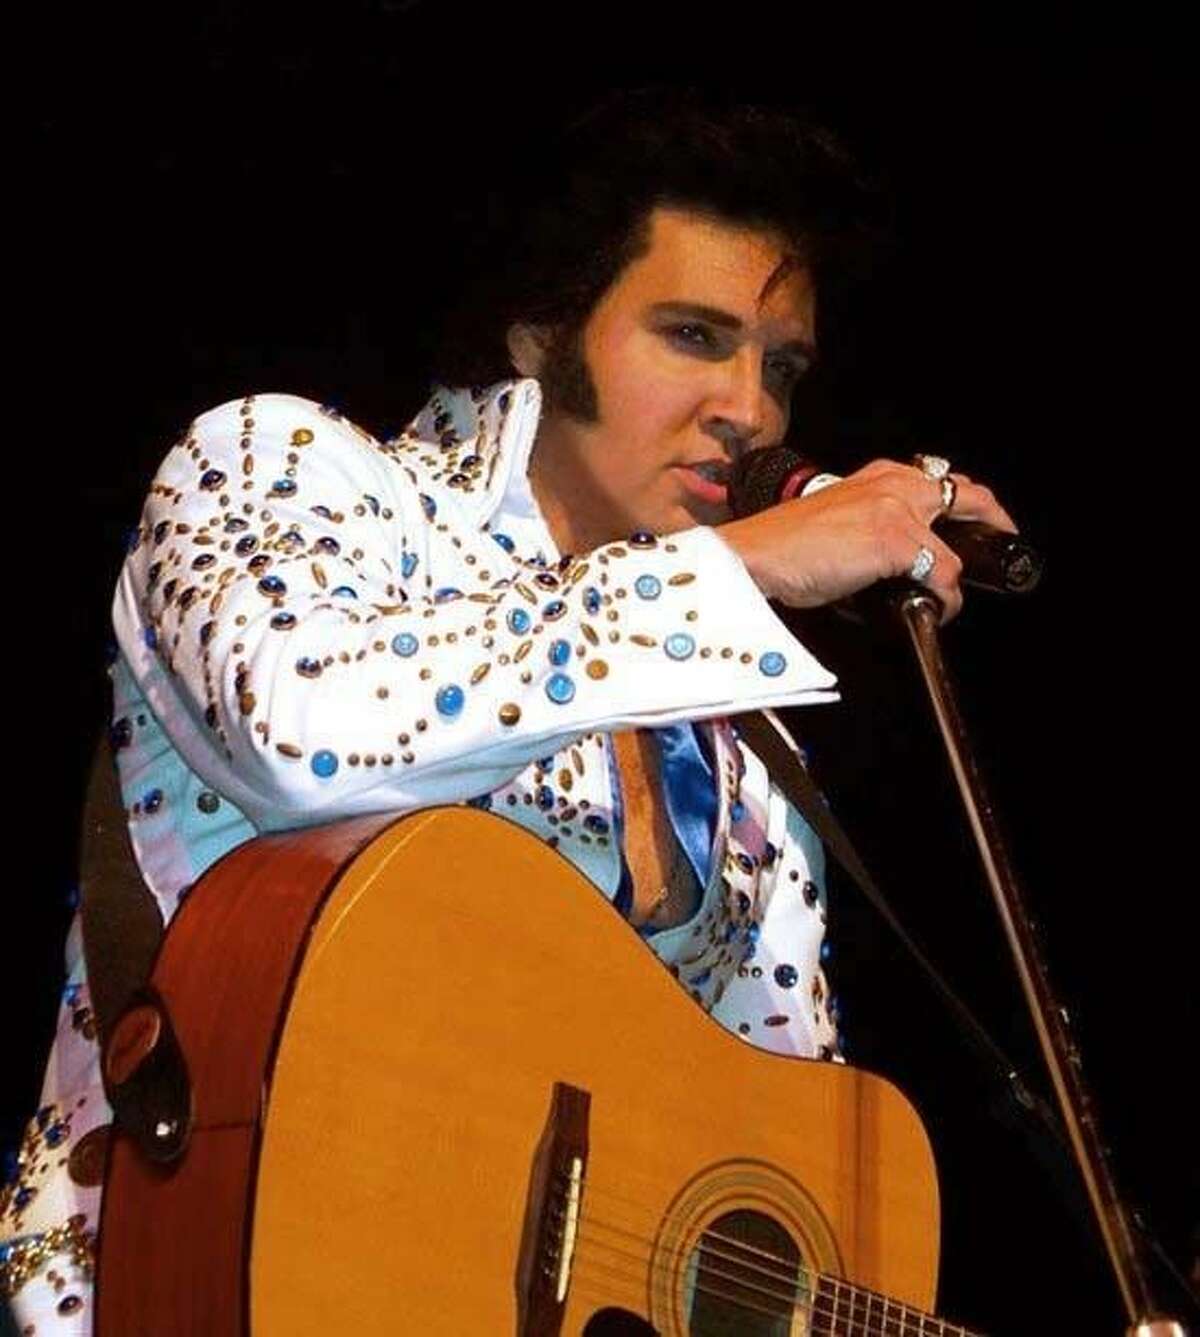 Elvis tribute artist Donny Edwards returns to Conroe for a show at the Crighton Theatre Saturday night.